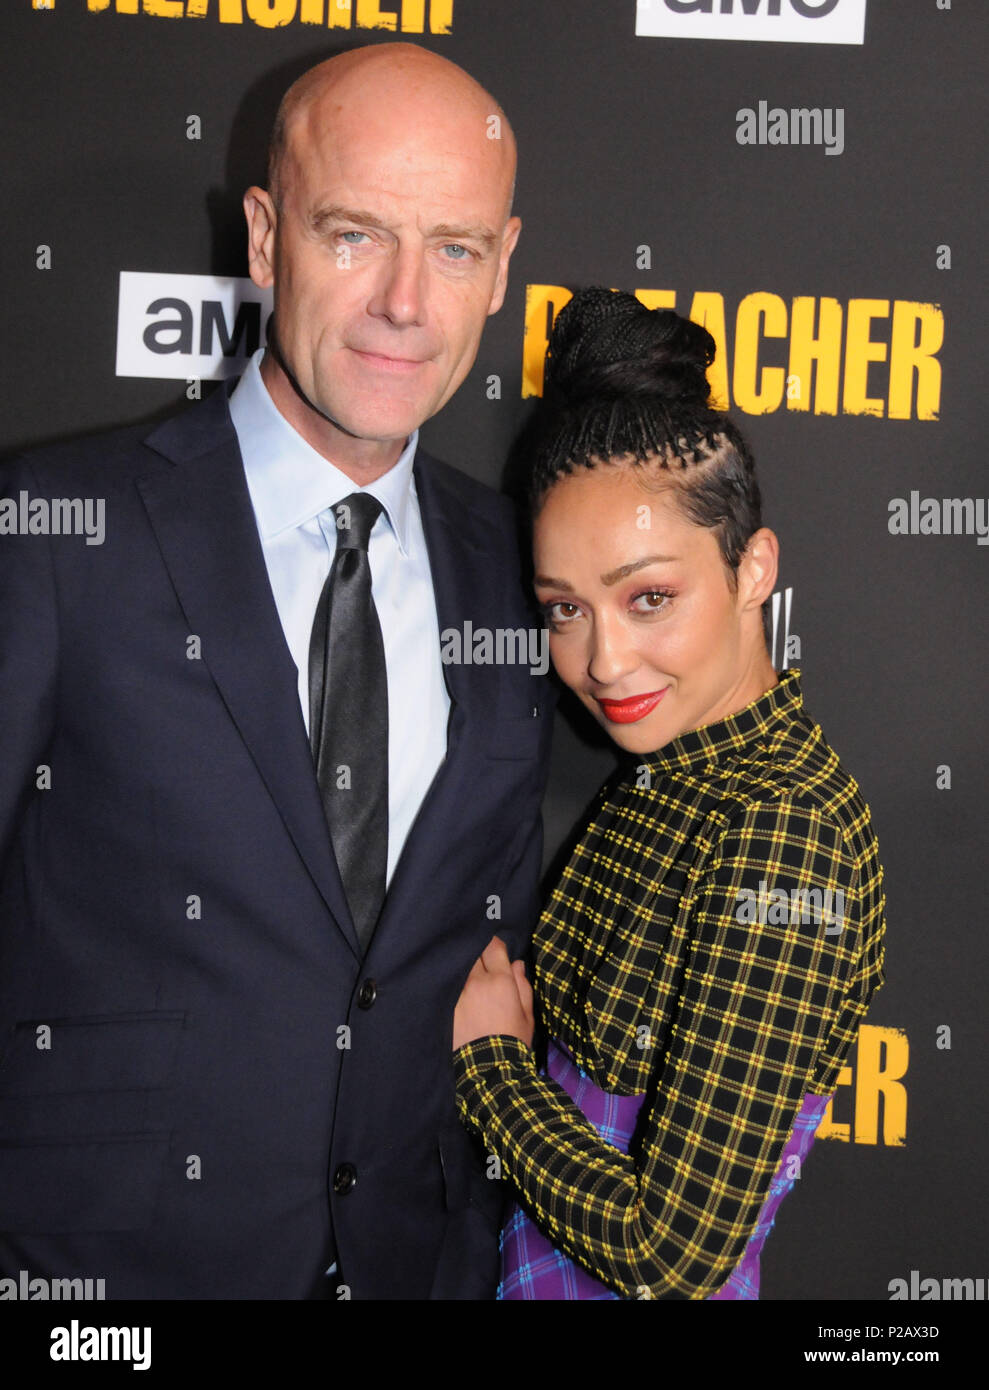 LOS ANGELES, CA - JUNE 14: (L-R) Actor Pip Torrens and actress Ruth Negga attend AMC's 'Preacher' Season 3 Premiere Party on June 14, 2018 at The Hearth and Hound in Los Angeles, California. Photo by Barry King/Alamy Live News Stock Photo